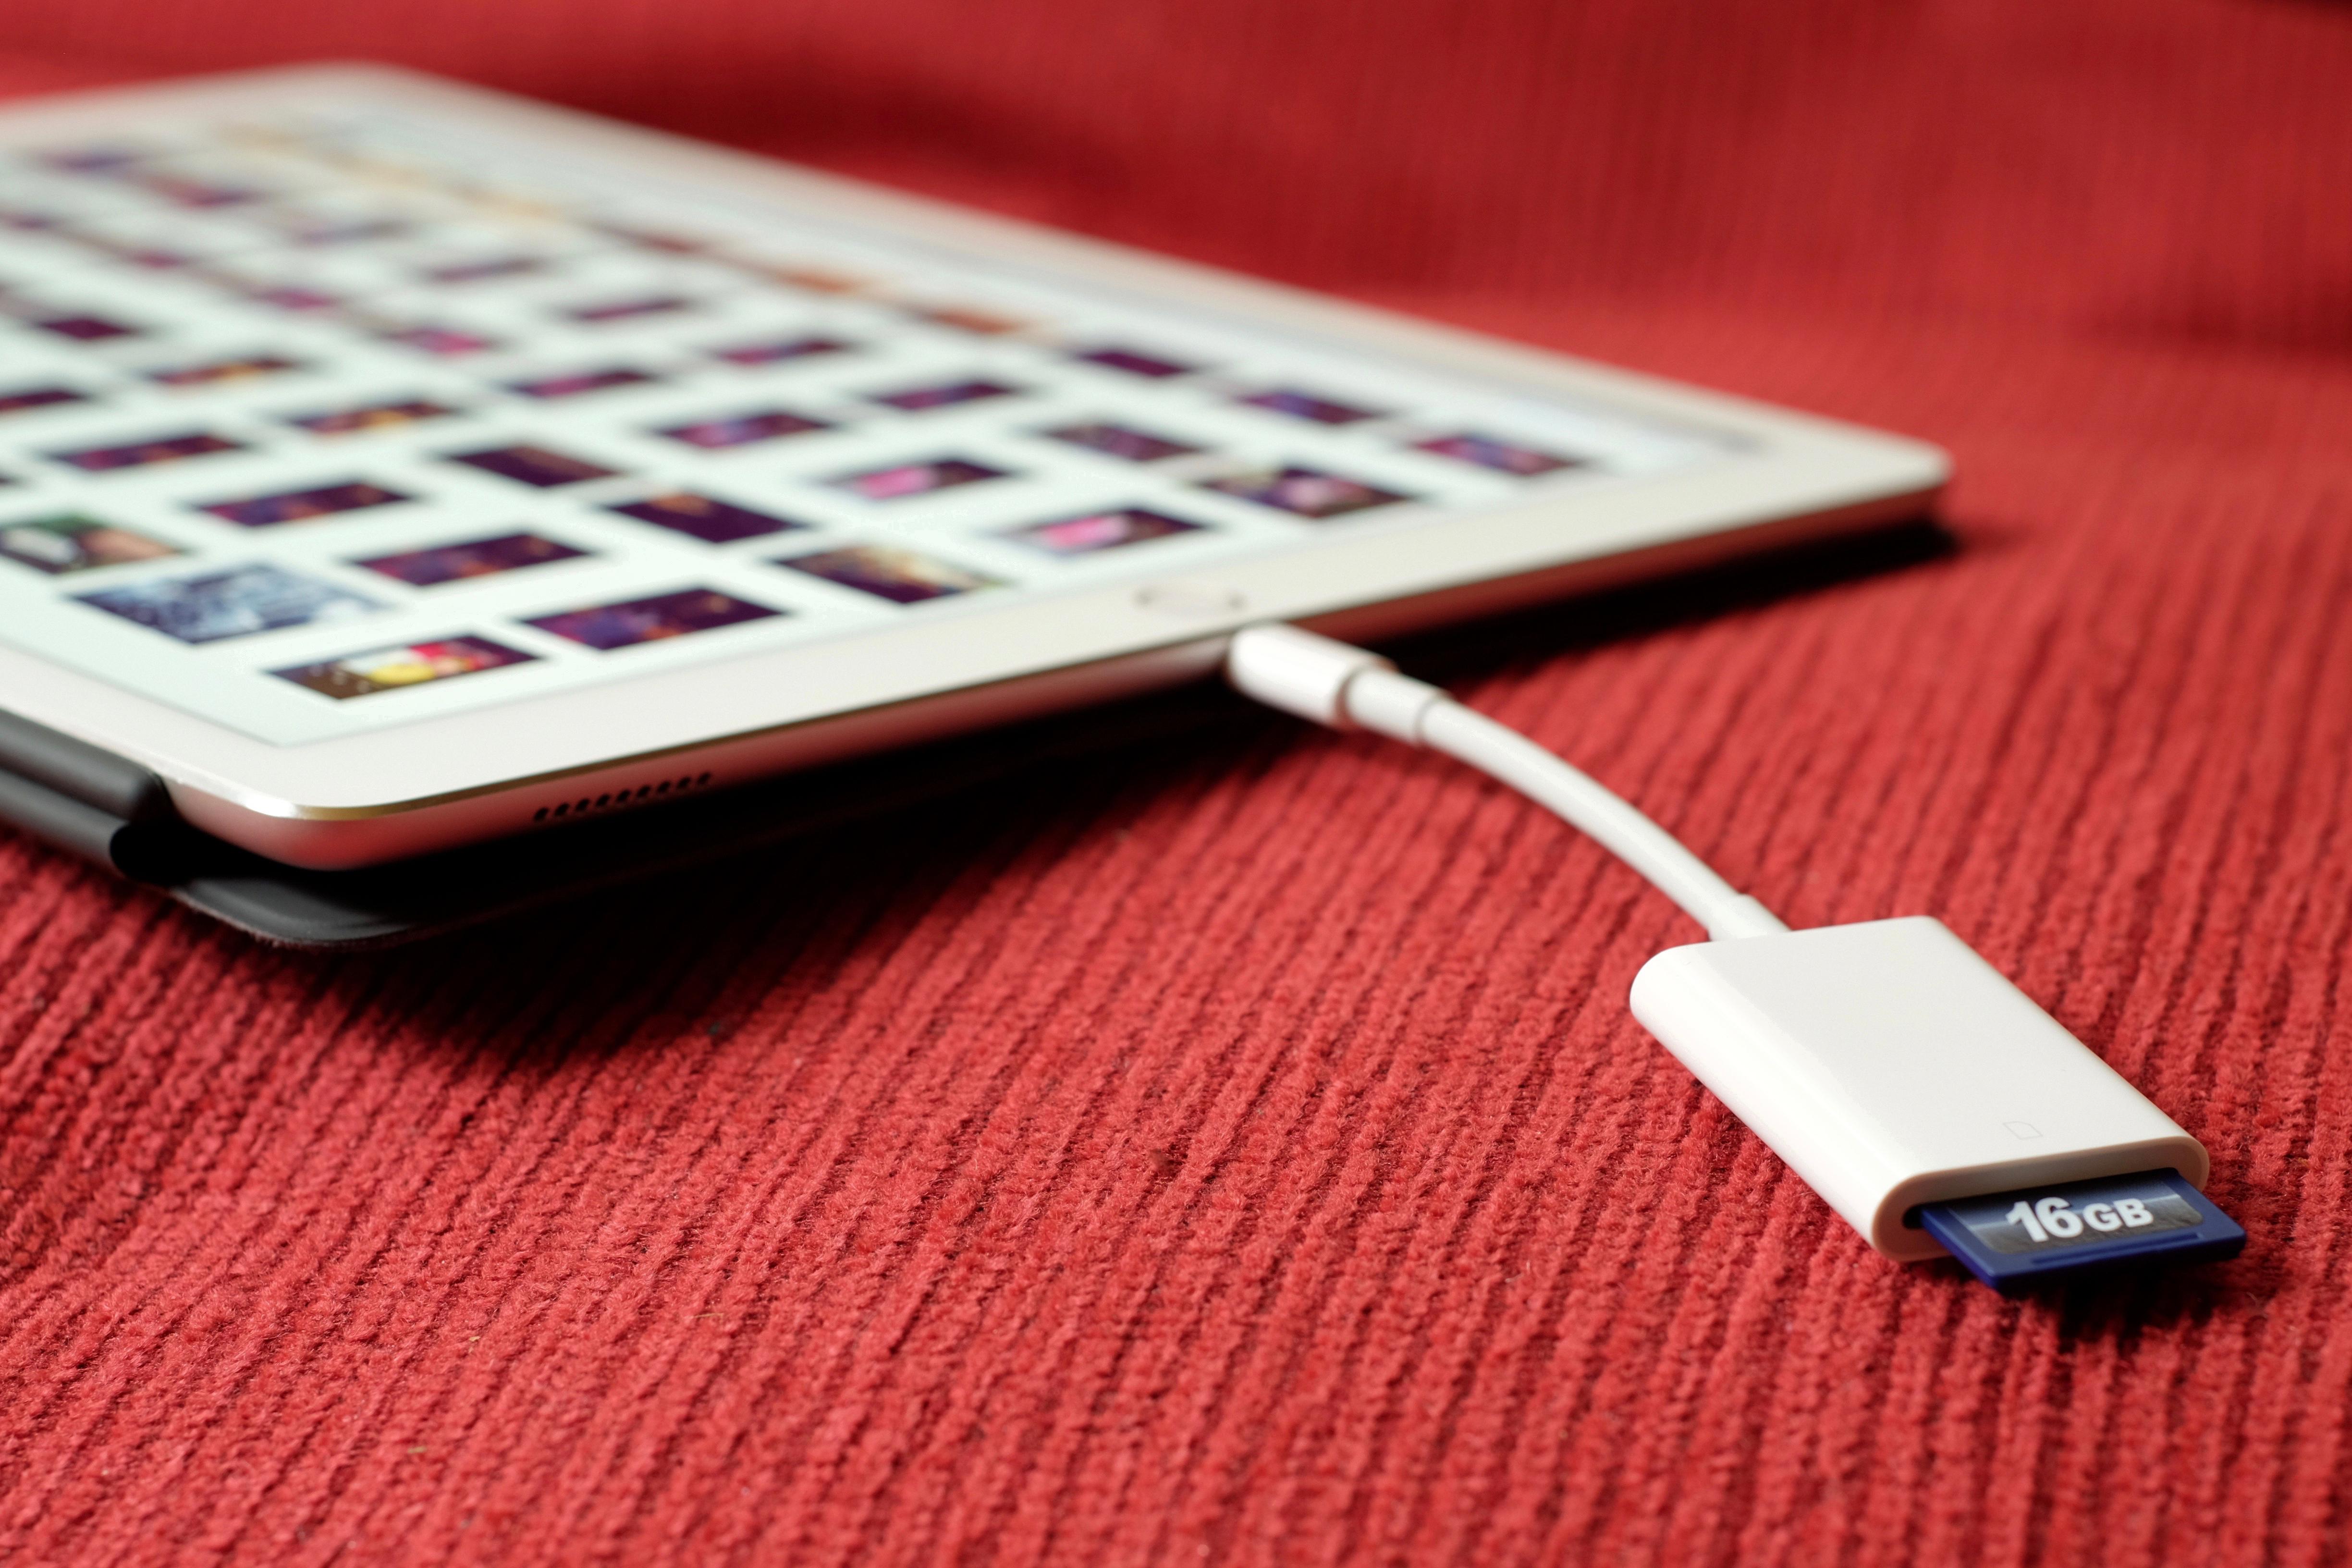 How To Eject Usb From Your iPad 3